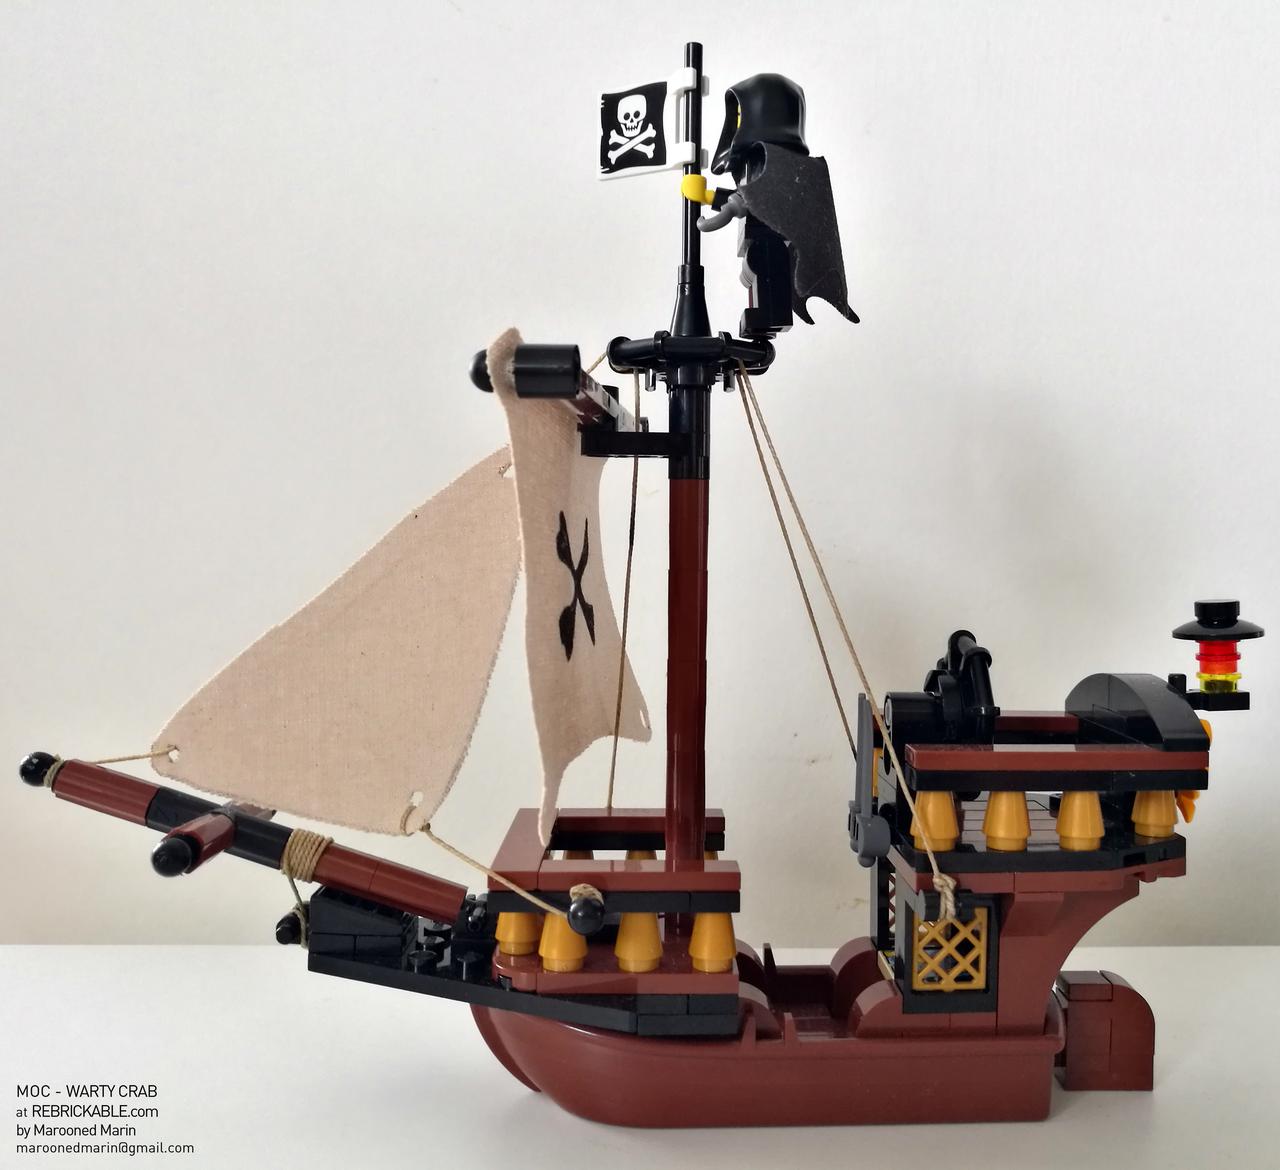 loco Fabricante materno The Warty Crab” by Marooned Marin – MOCs – Pirate LEGO® News and MOCs